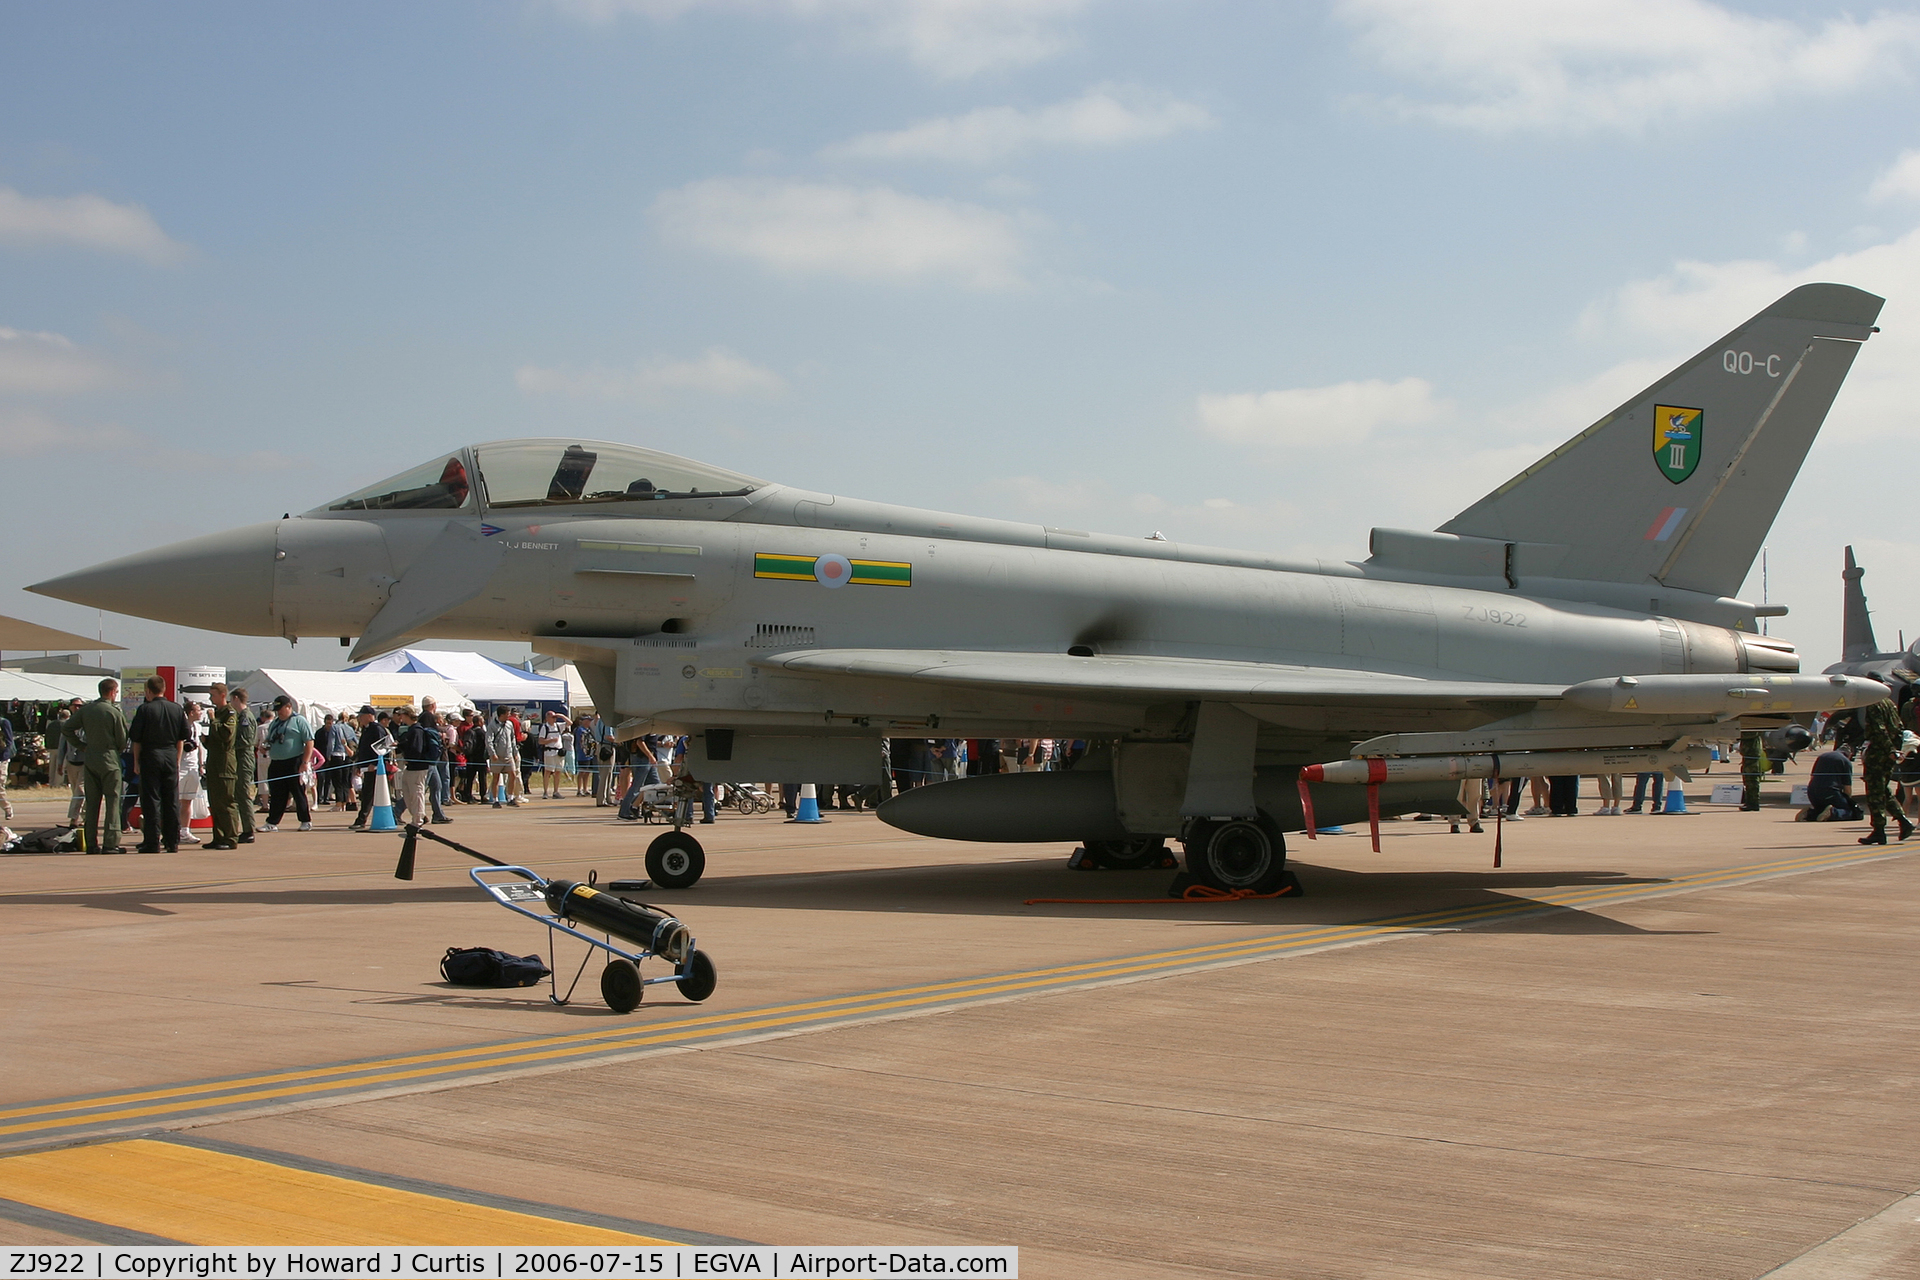 ZJ922, 2005 Eurofighter EF-2000 Typhoon F2 C/N 0073/BS013, RIAT 2006; on static display. Actually an F2 at the time of this photo, subsequently converted to FGR4 status. QO-C/3 Squadron.